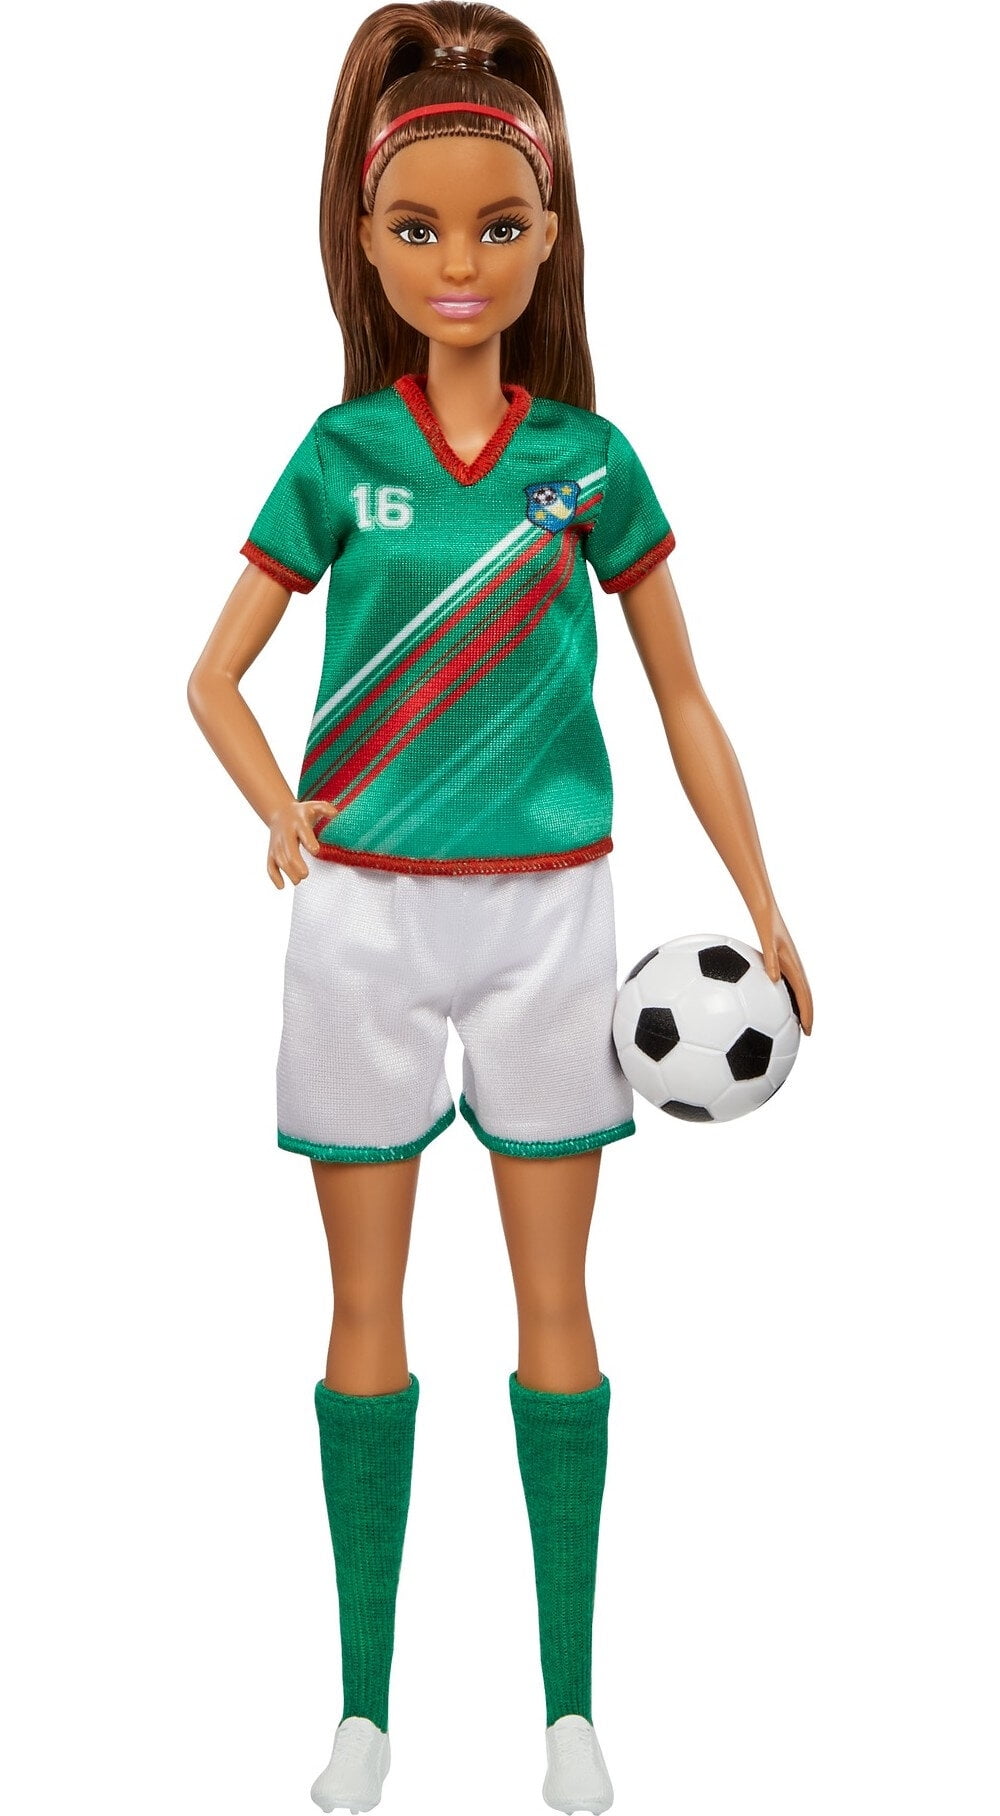 Barbie Soccer Fashion Doll Dressed in Cleats, Colorful #16 Uniform & Tall Socks, Brunette Ponytail